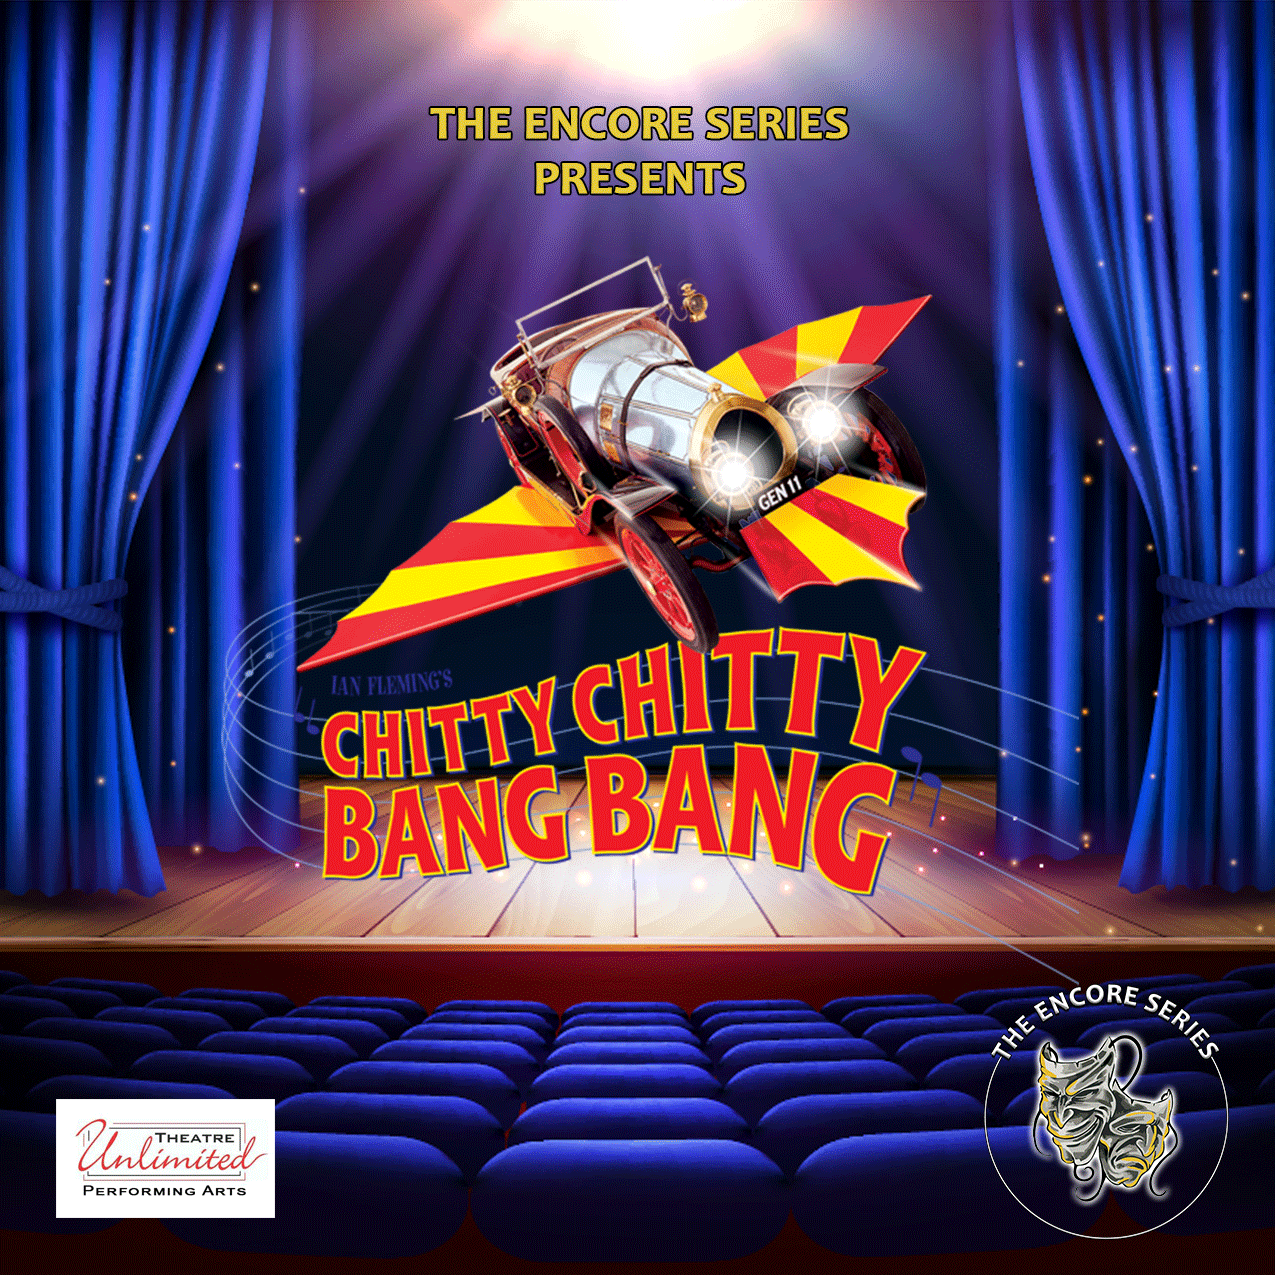 chitty chitty bang bang show logo on a stage with blue curtains